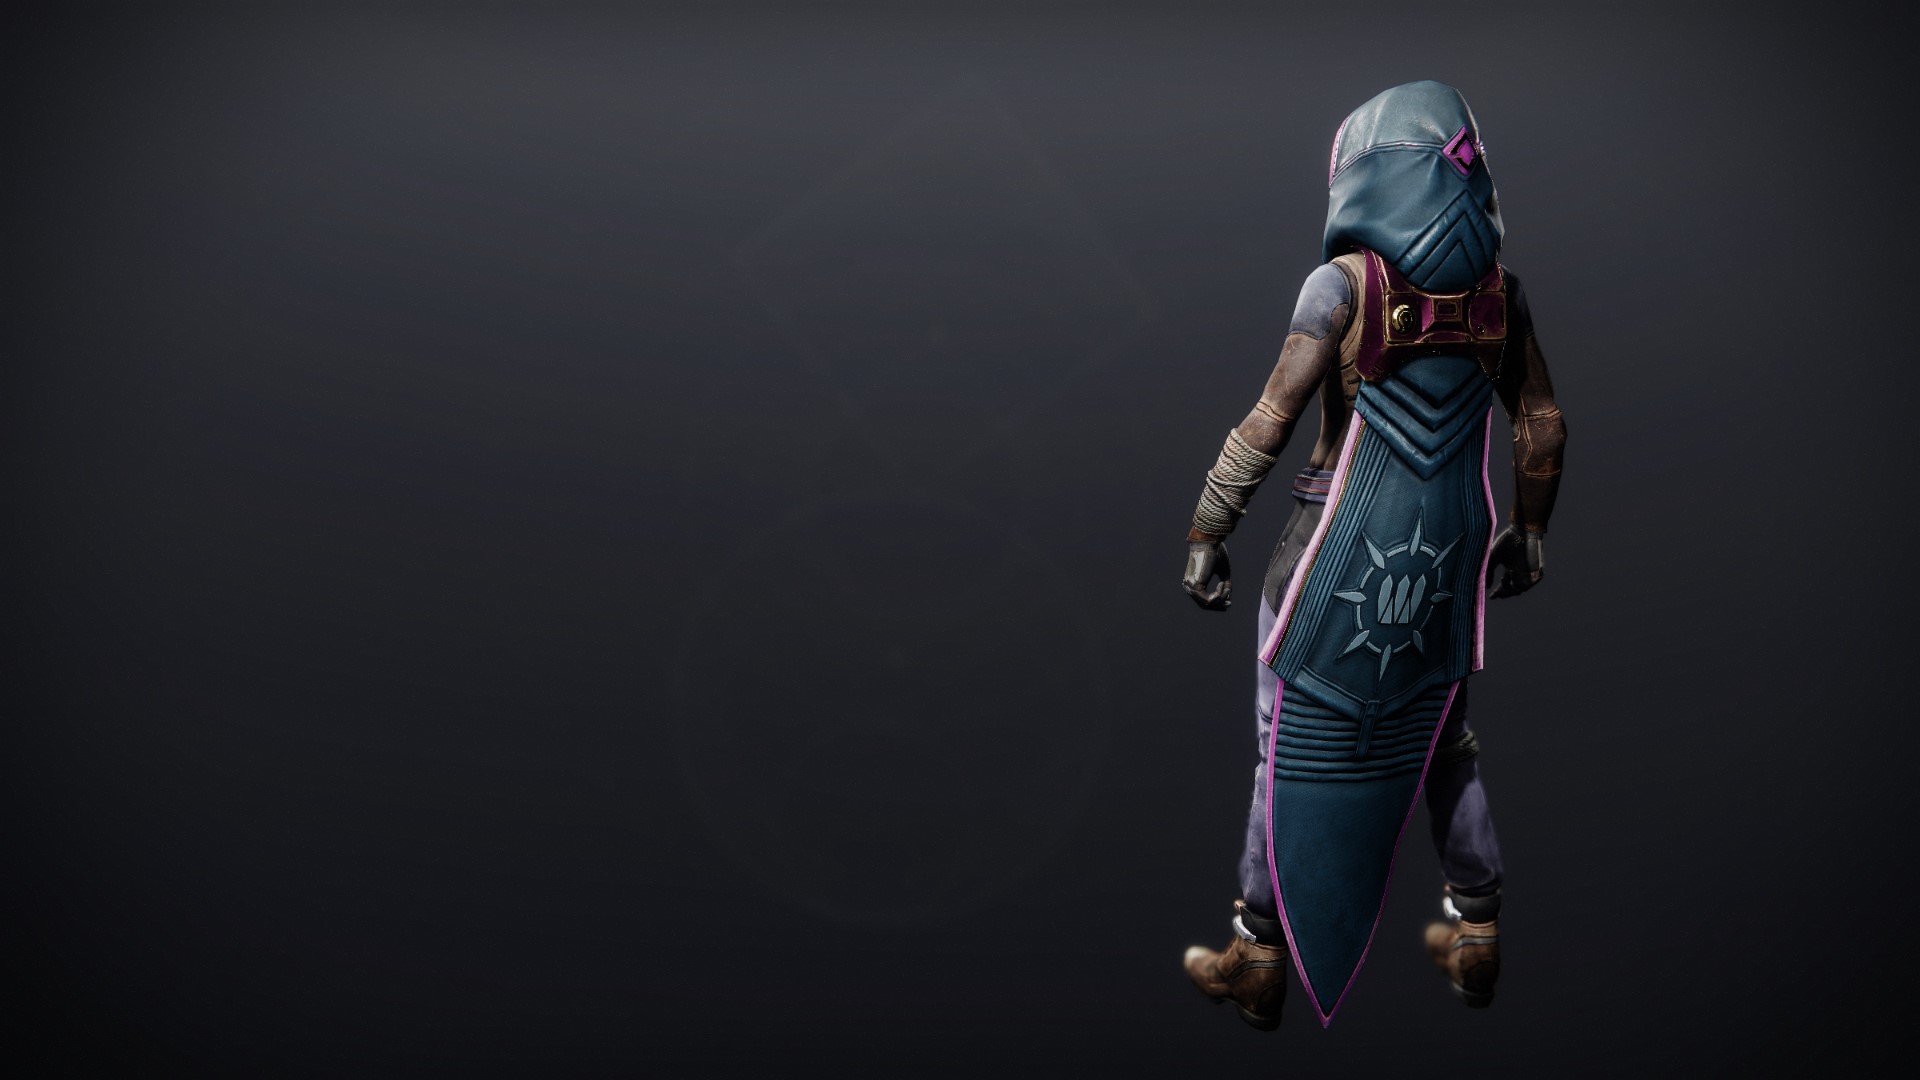 An in-game render of the Pathfinder's Hood.